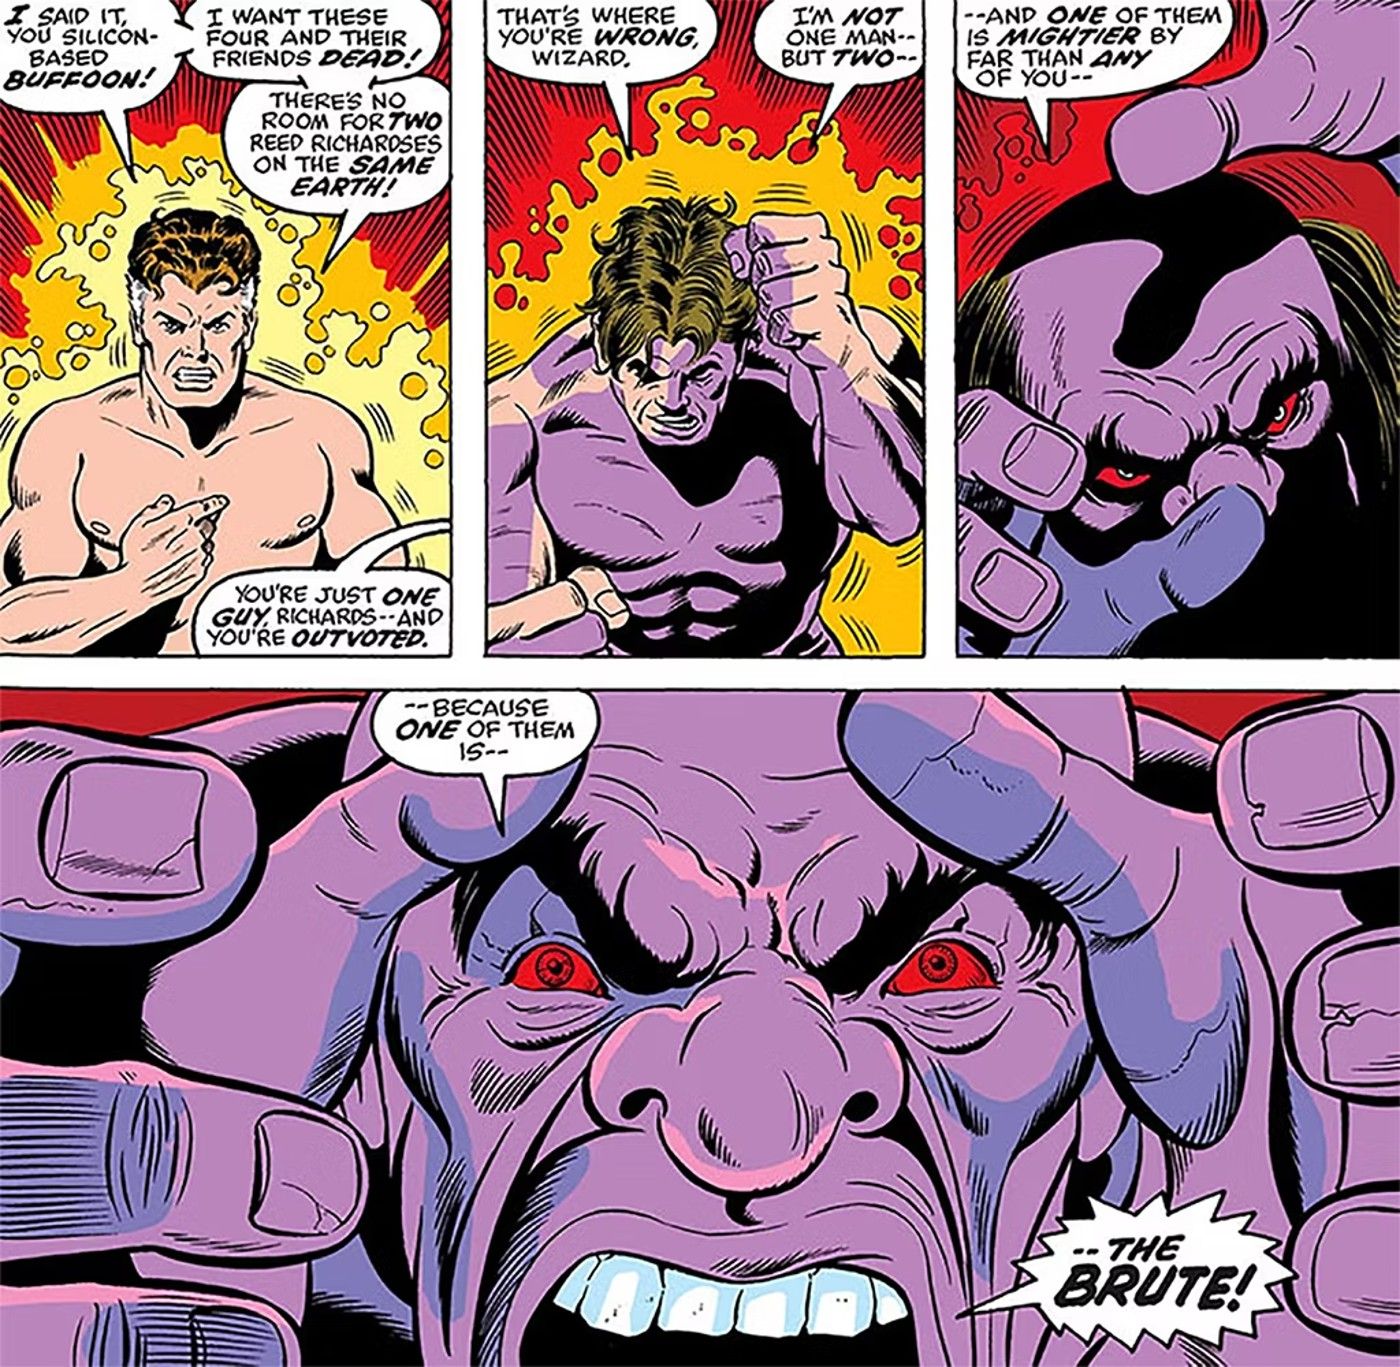 Fantastic Four’s Reed Richards Has His Own Hulk Form – The Brute